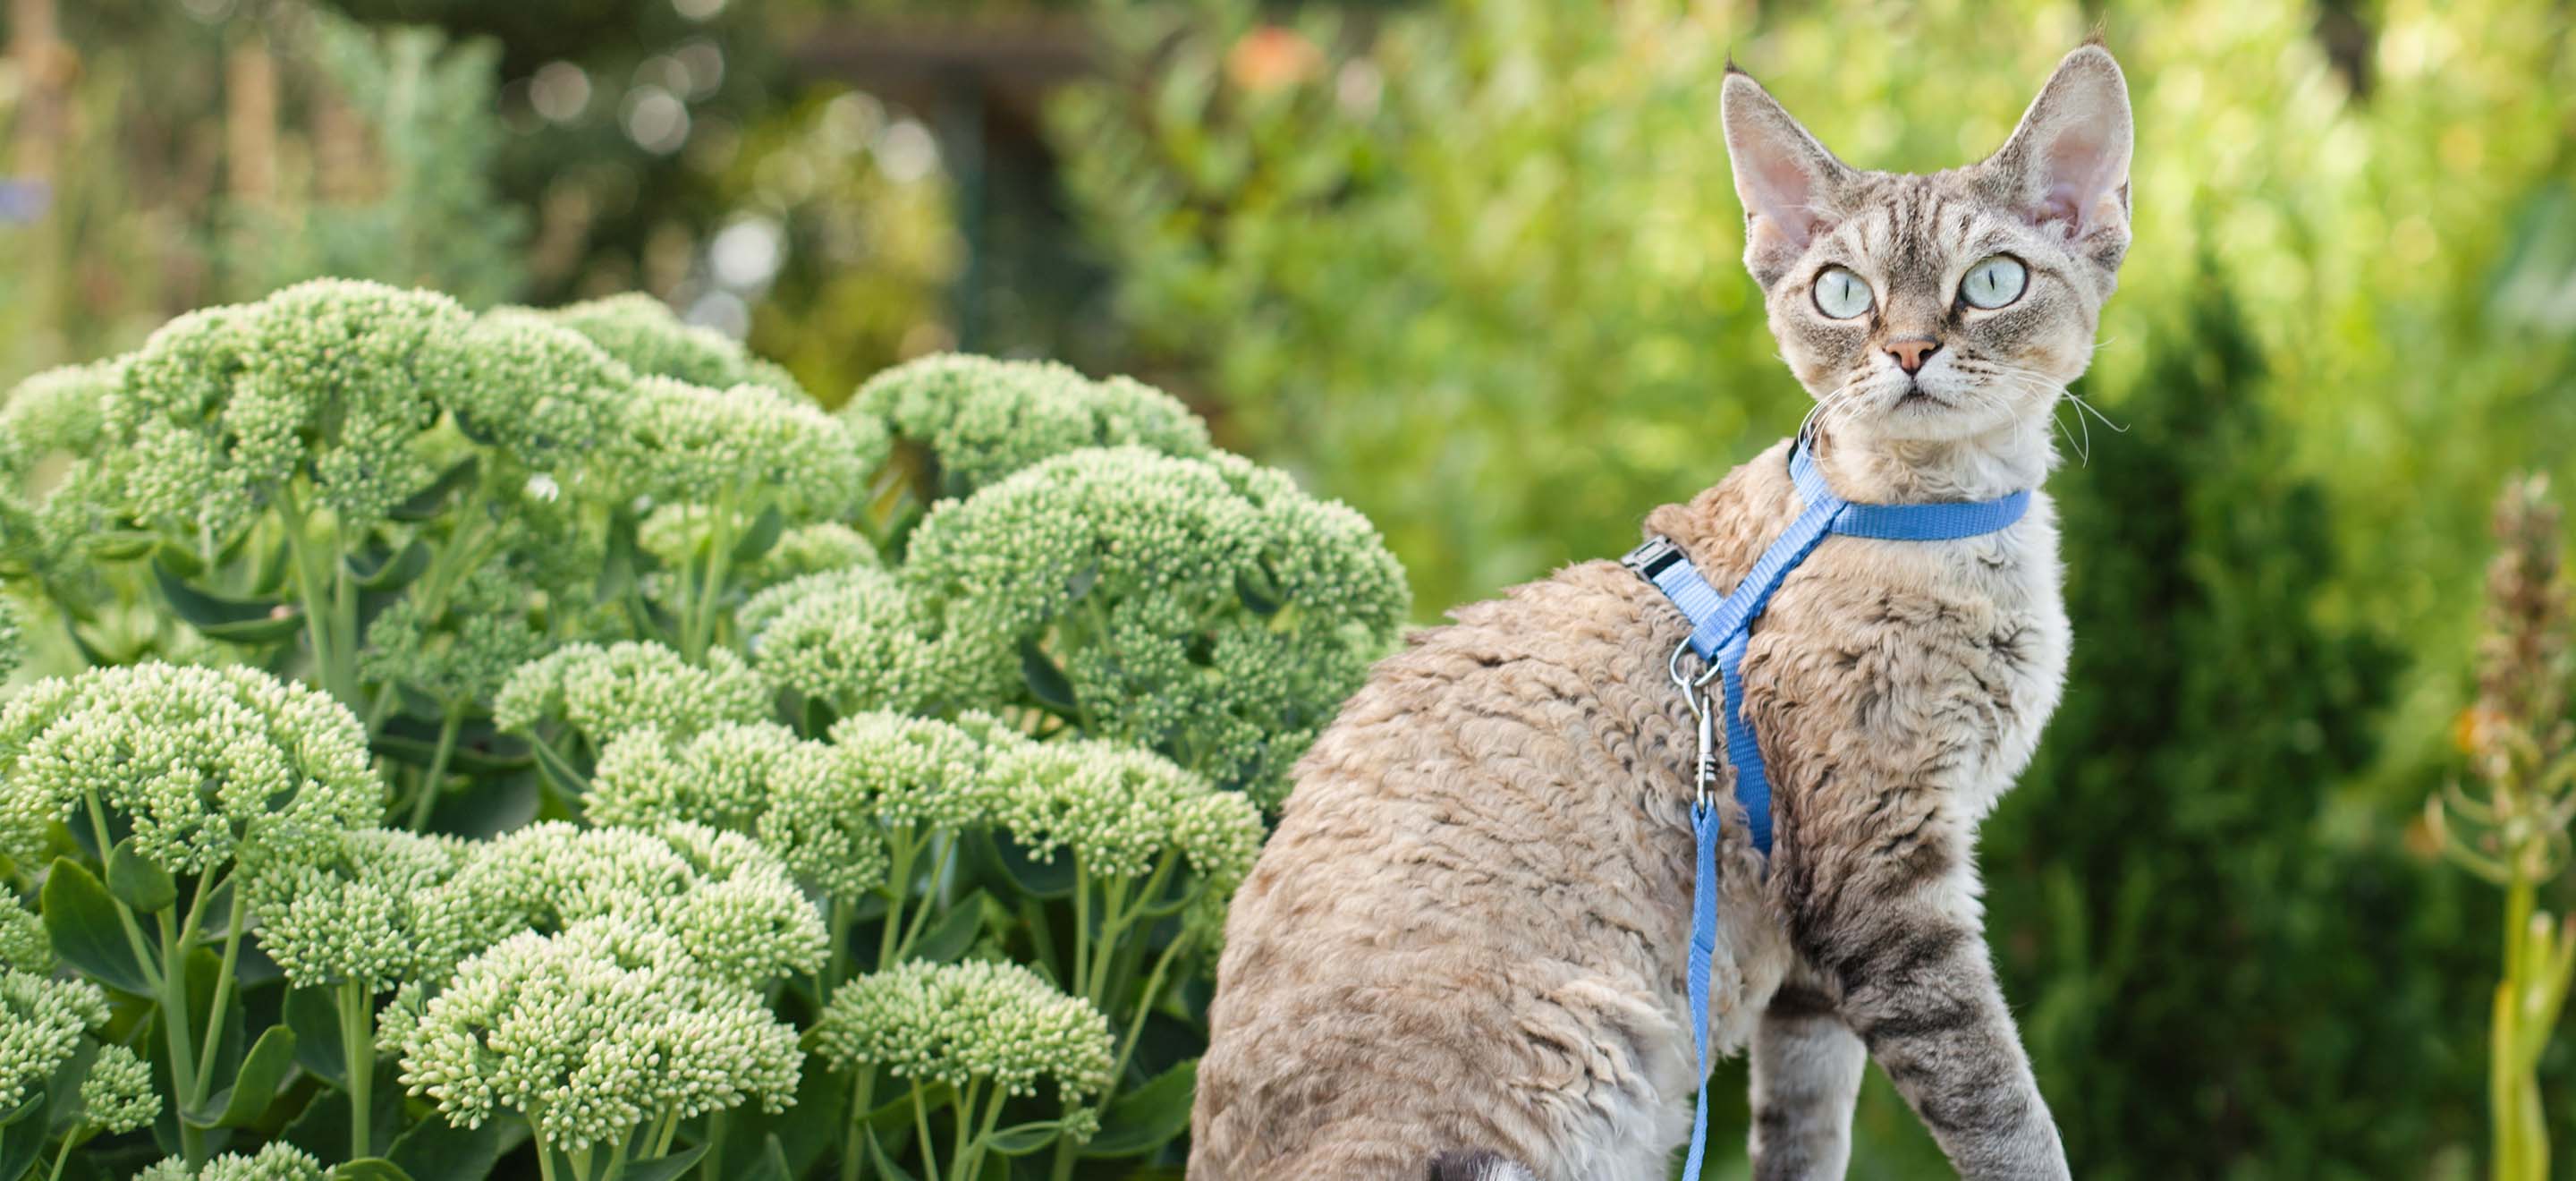 A Devon Rex cat with a blue harness on standing in the garden image